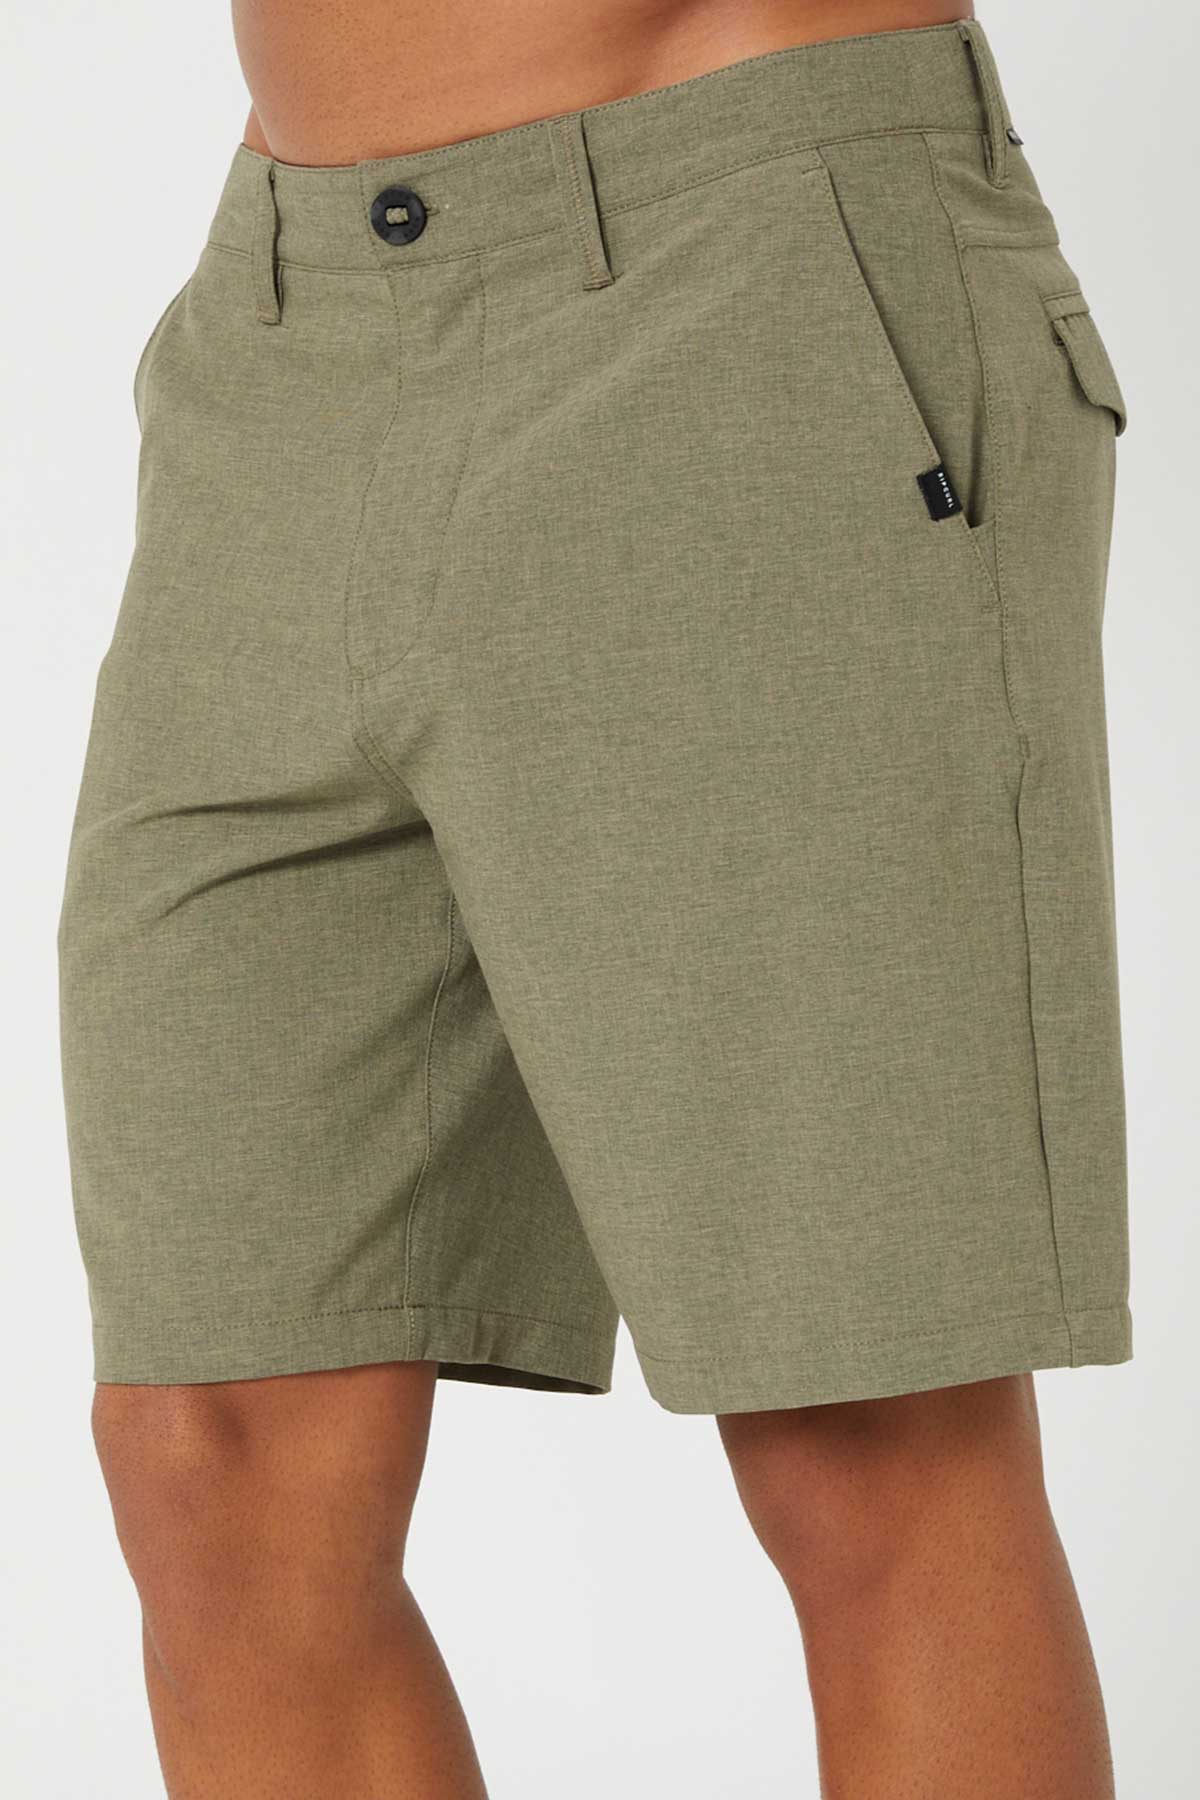 Rip Curl Mens Shorts Boardwalk Epic Mix in Washed Moss side